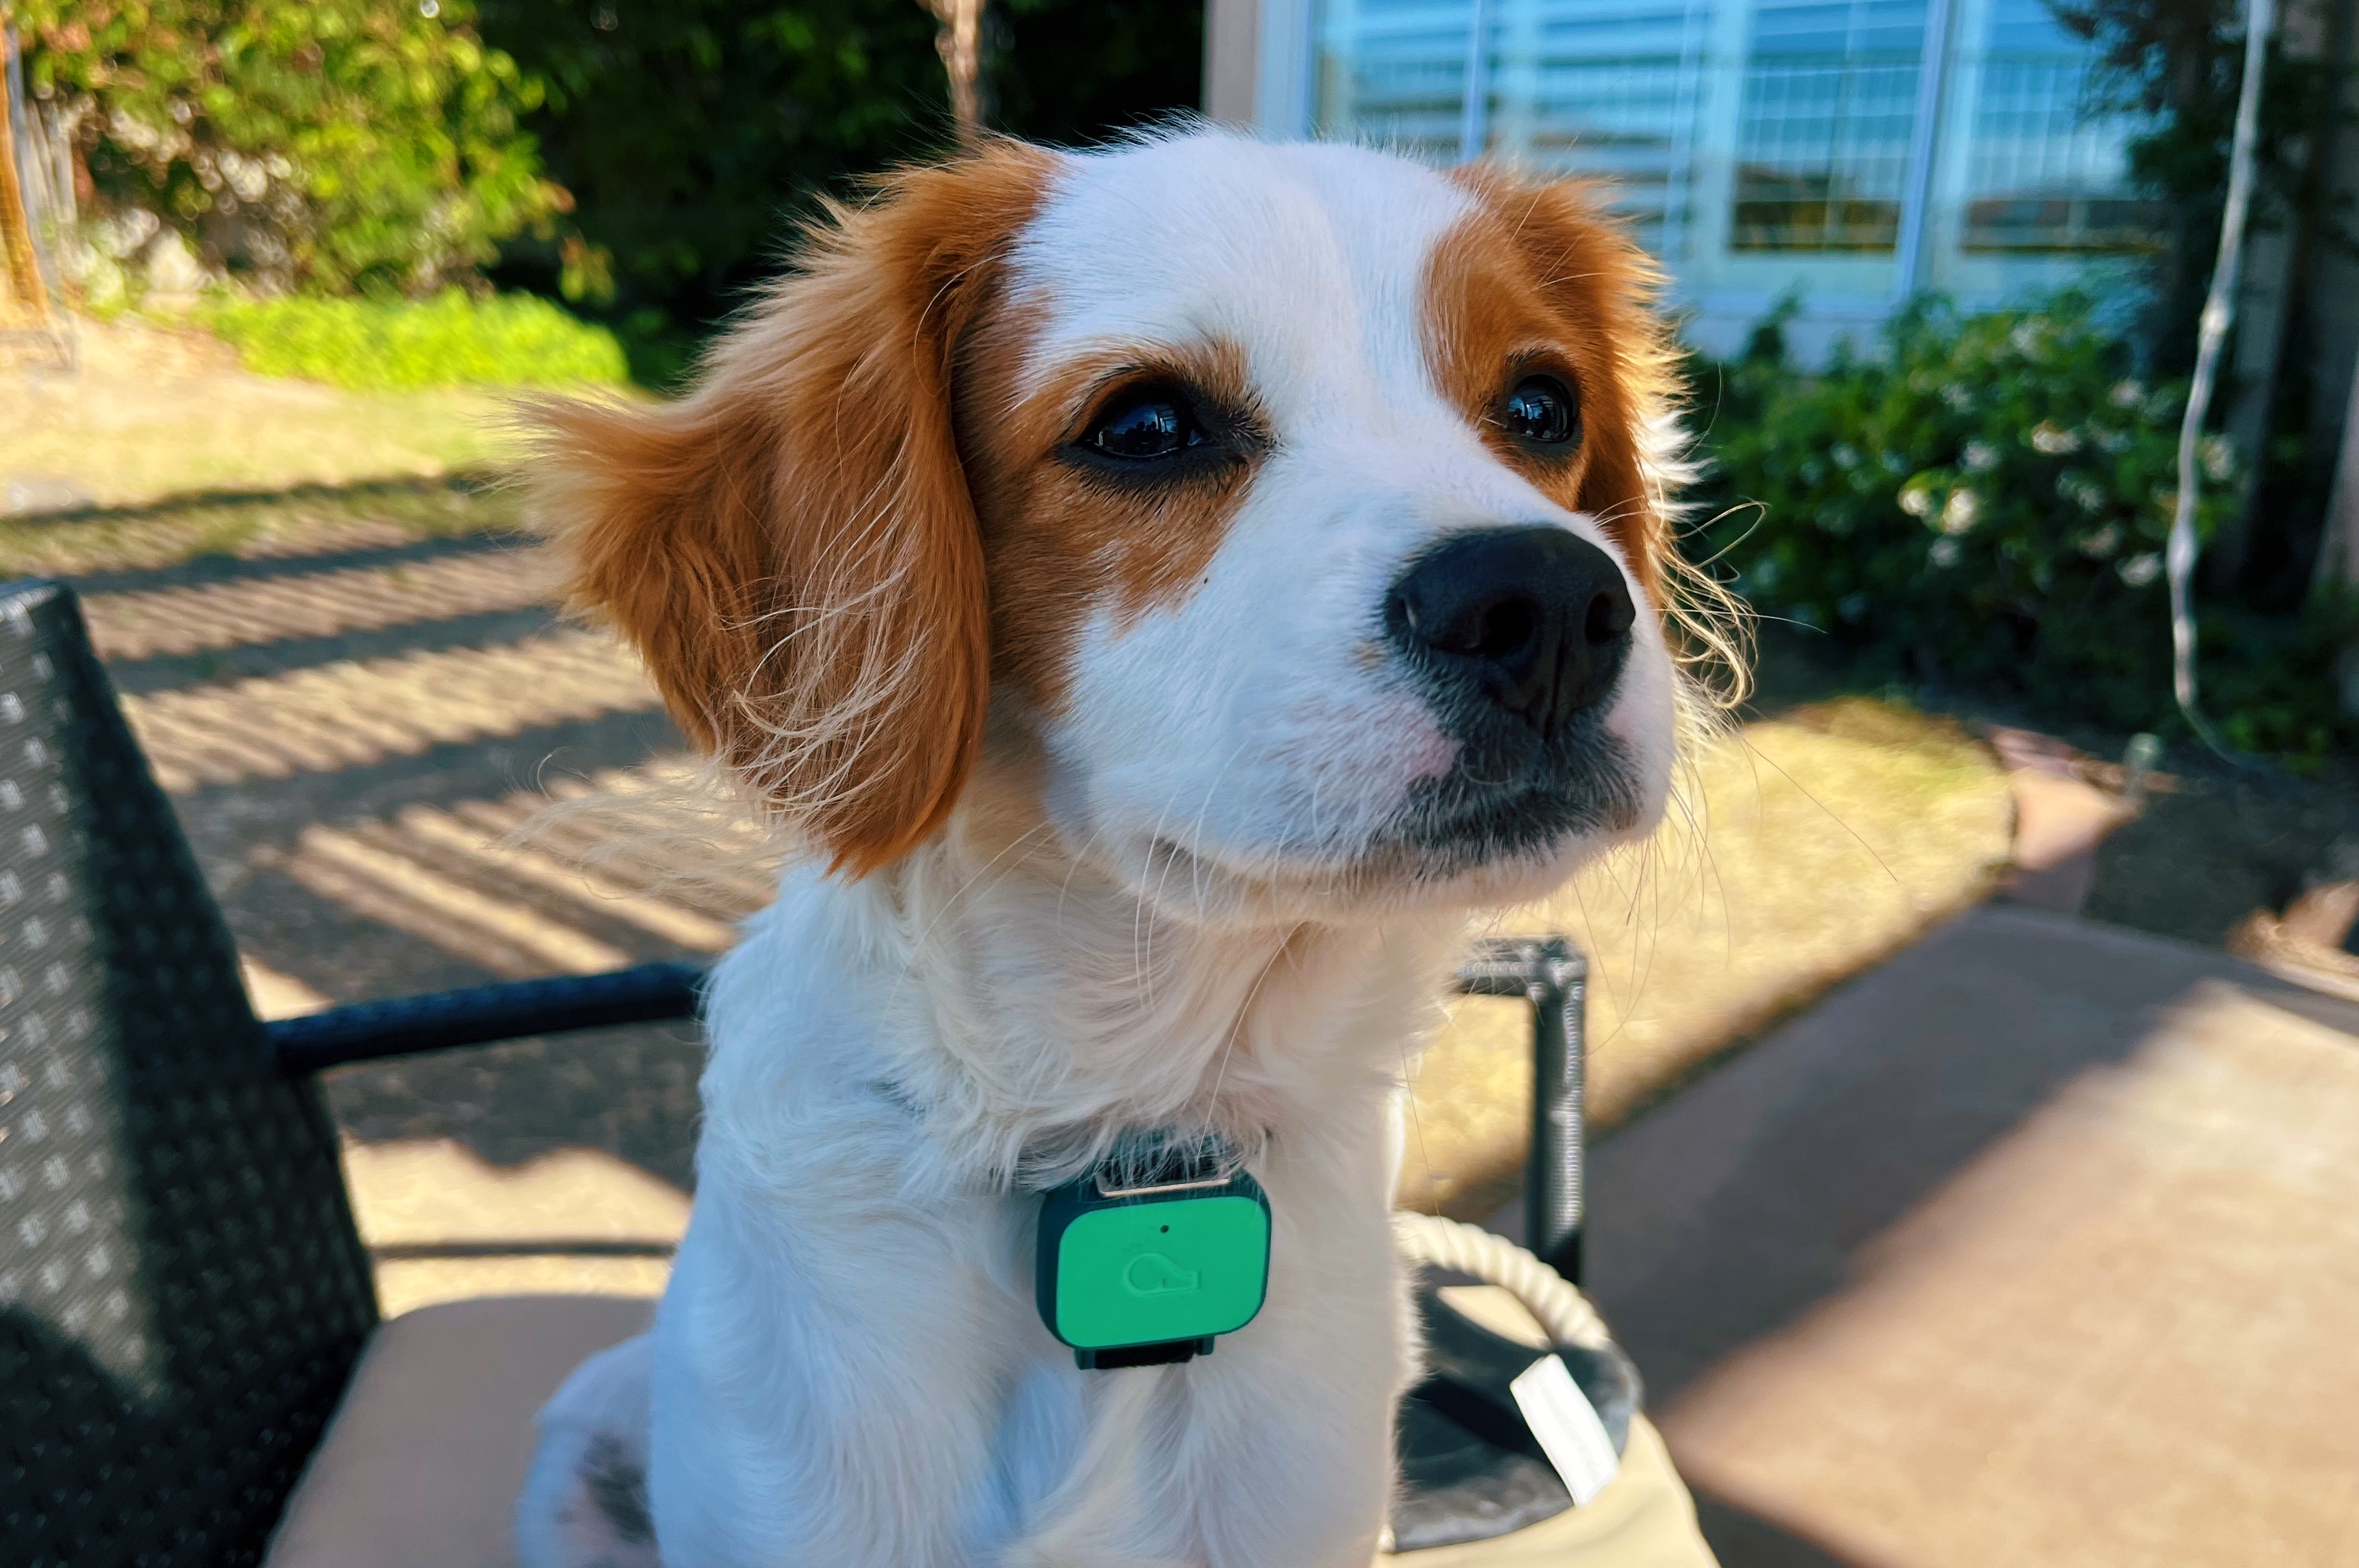 Whistle Health Tracks a Dog’s Activity on the Cheap